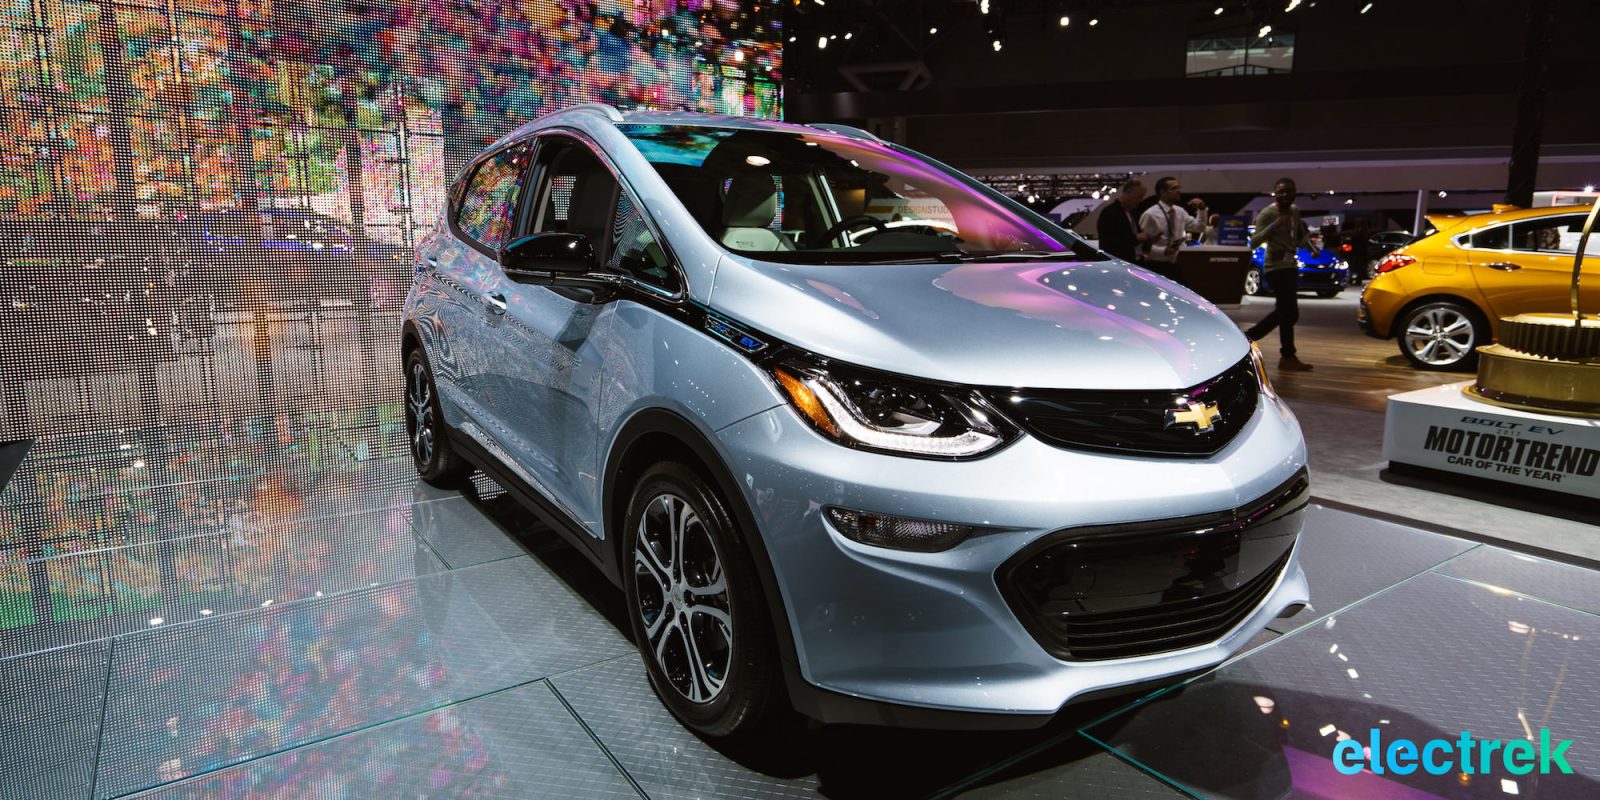 GM drops GPS navigation in the Chevy Bolt, relying on customers' smartphones instead.